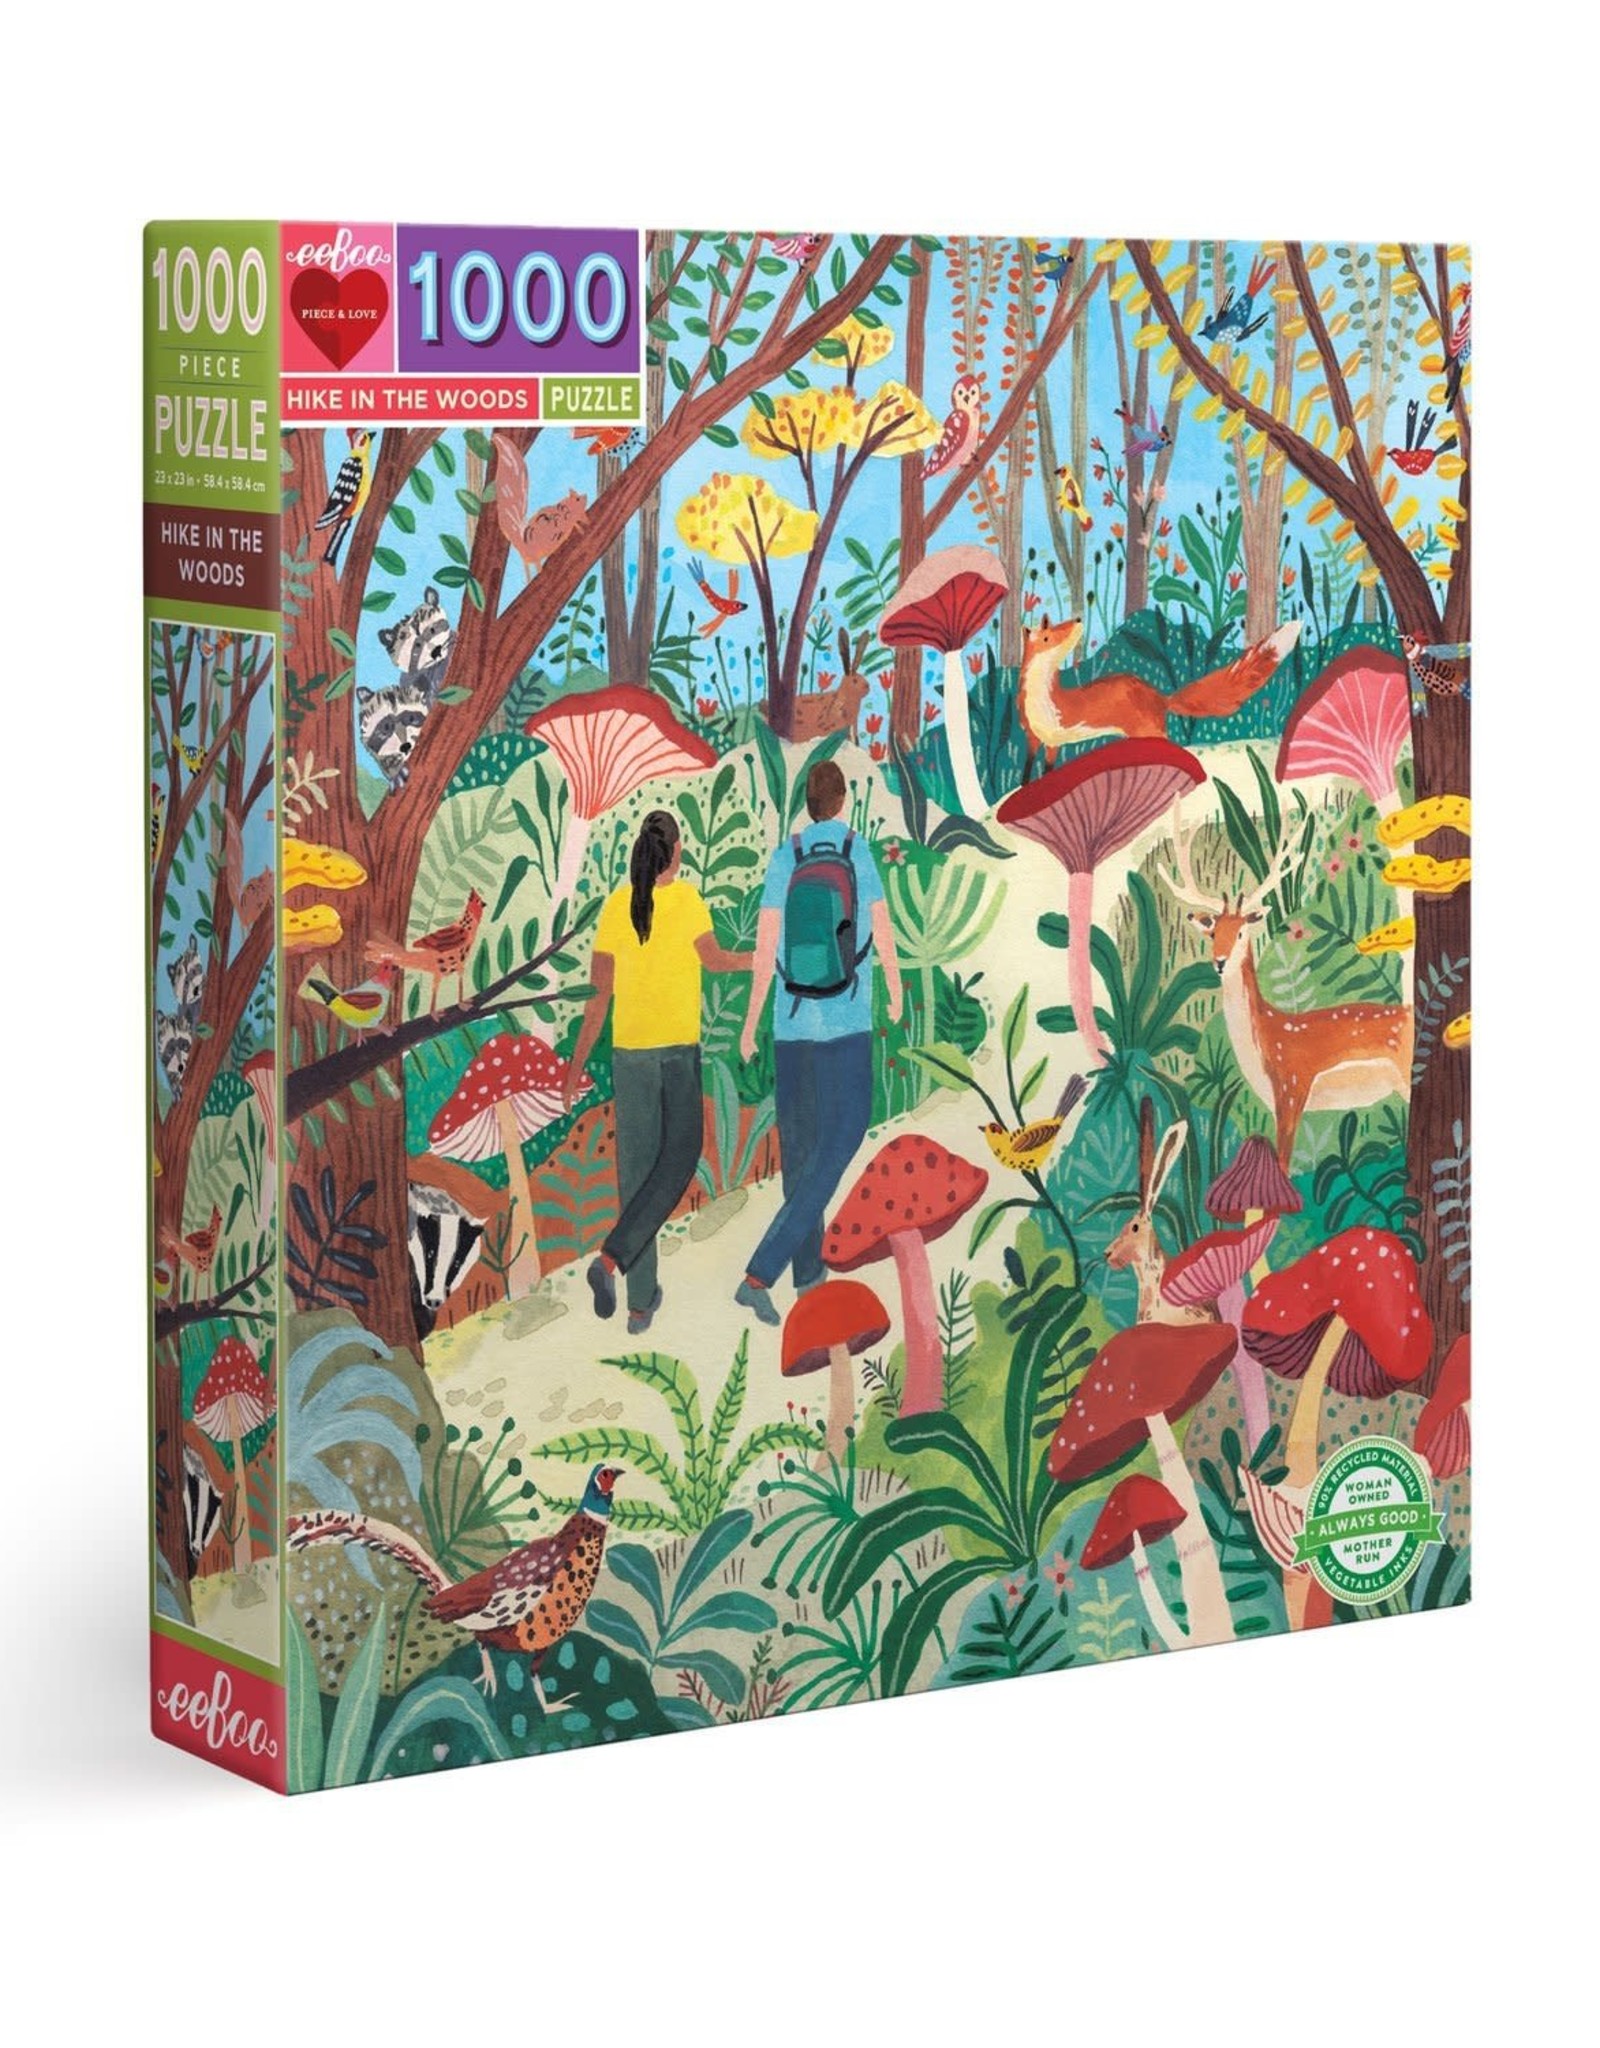 eeBoo HIKE IN THE WOODS 1000PC SQ PUZZLE